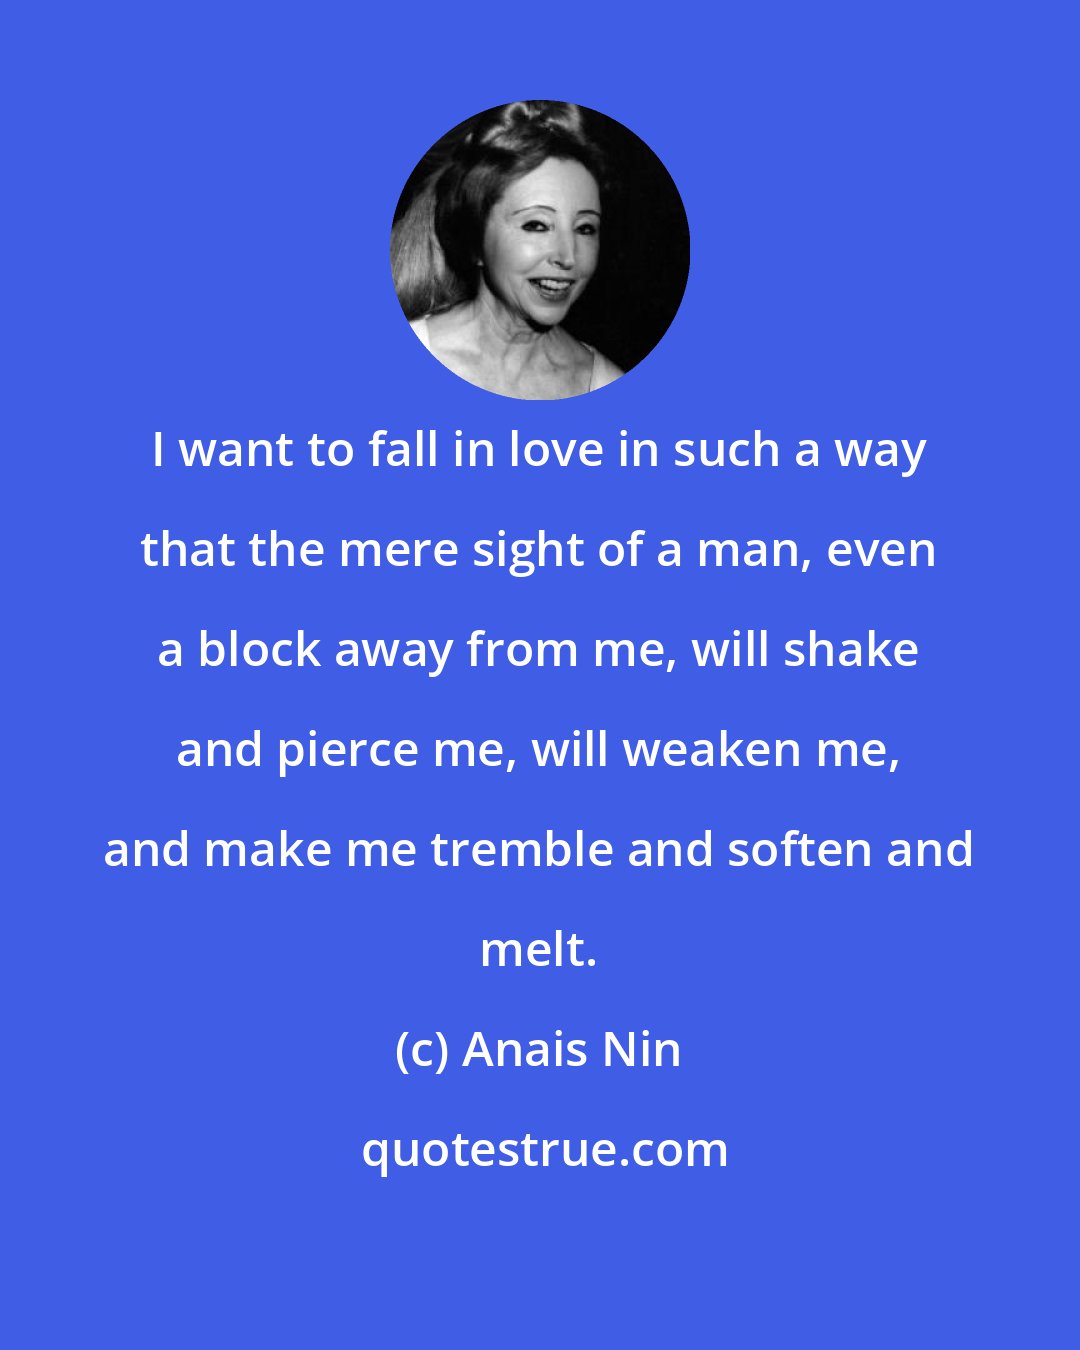 Anais Nin: I want to fall in love in such a way that the mere sight of a man, even a block away from me, will shake and pierce me, will weaken me, and make me tremble and soften and melt.